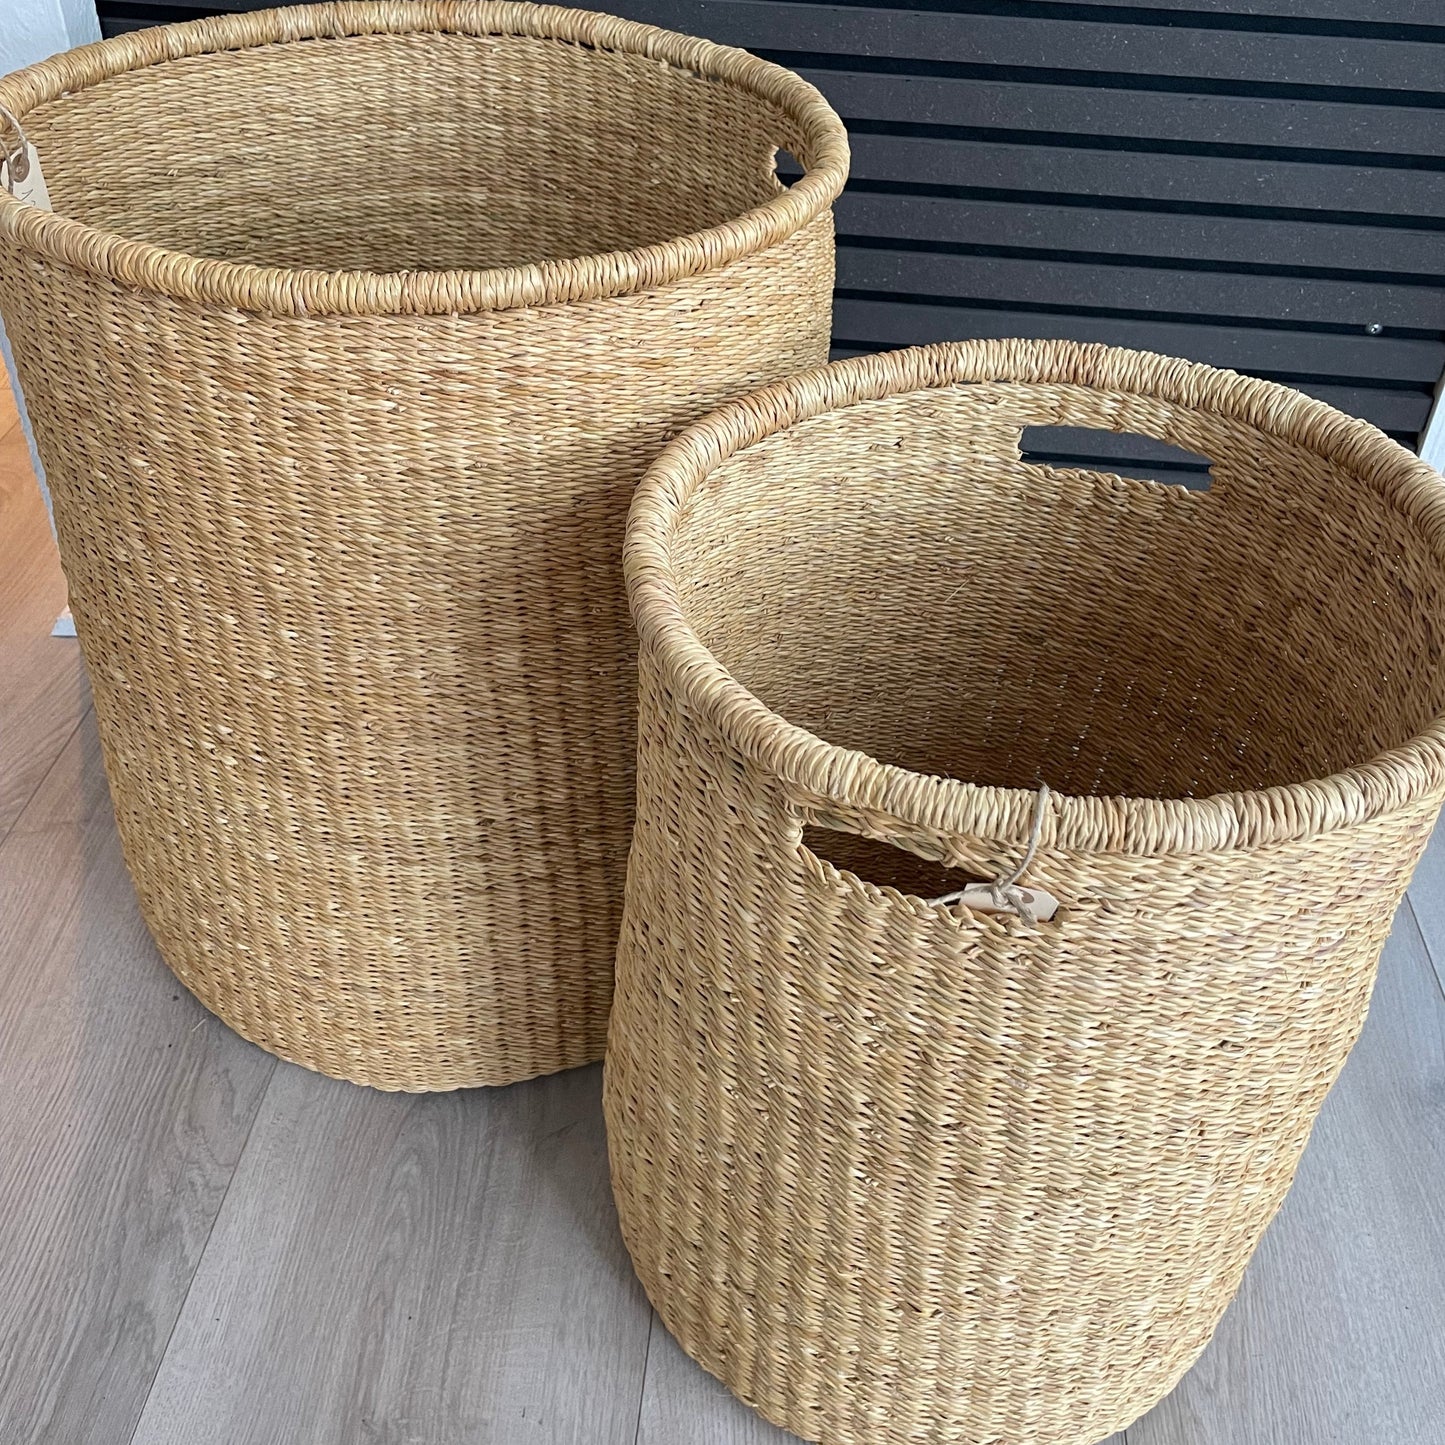 Laundry basket in woven elephant grass in three sizes. Handmade and Fair Trade from Ghana